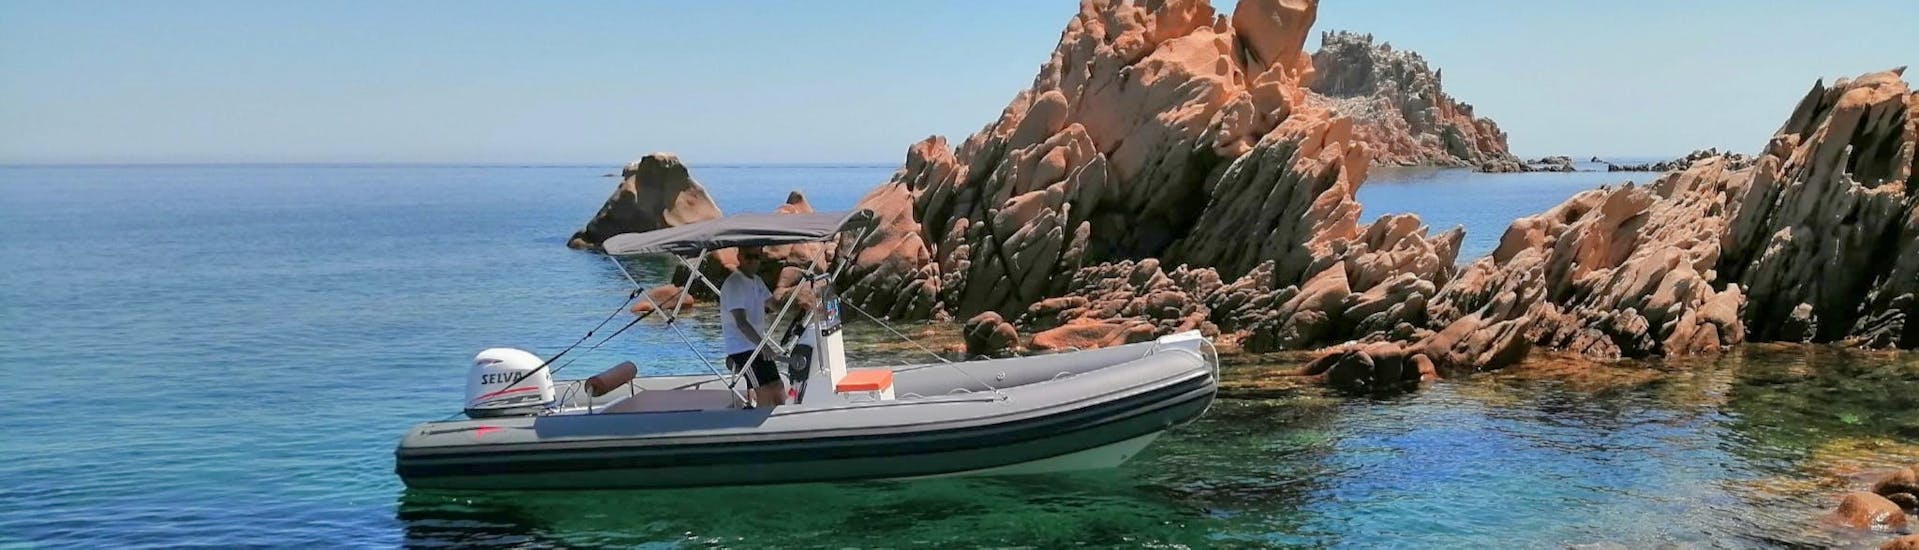 Rocce Rosse's RIB boat viewed from the coast during the RIB Boat Rental in Arbatax (up to 6 people) with Rocce Rosse.